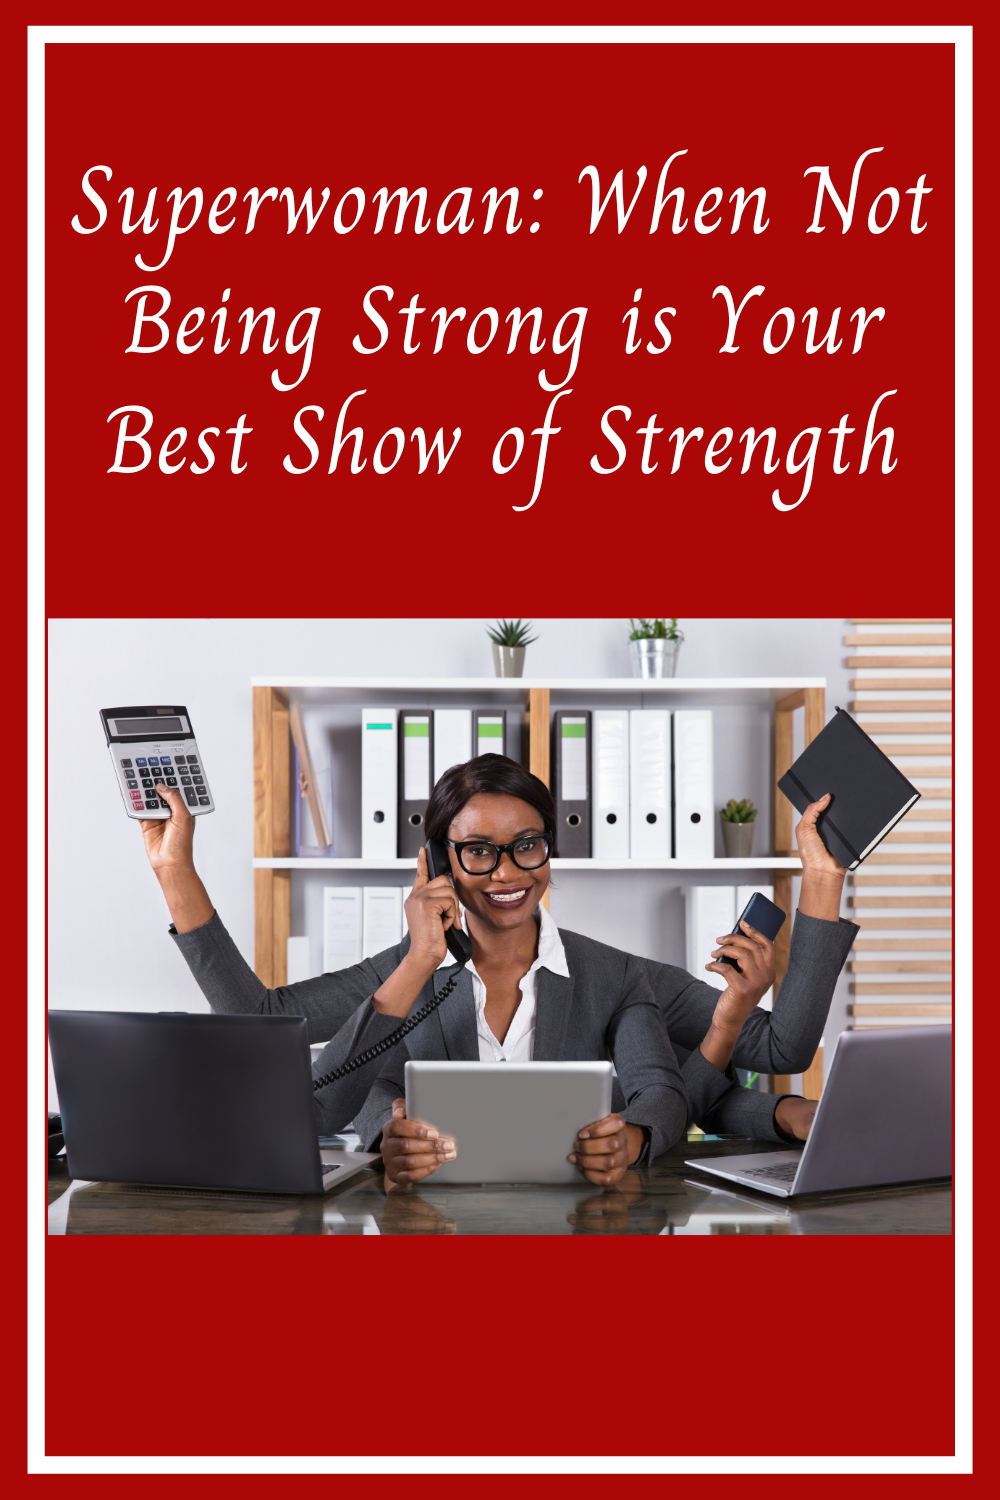 Superwoman: When Not Being Strong is Your Best Show of Strength